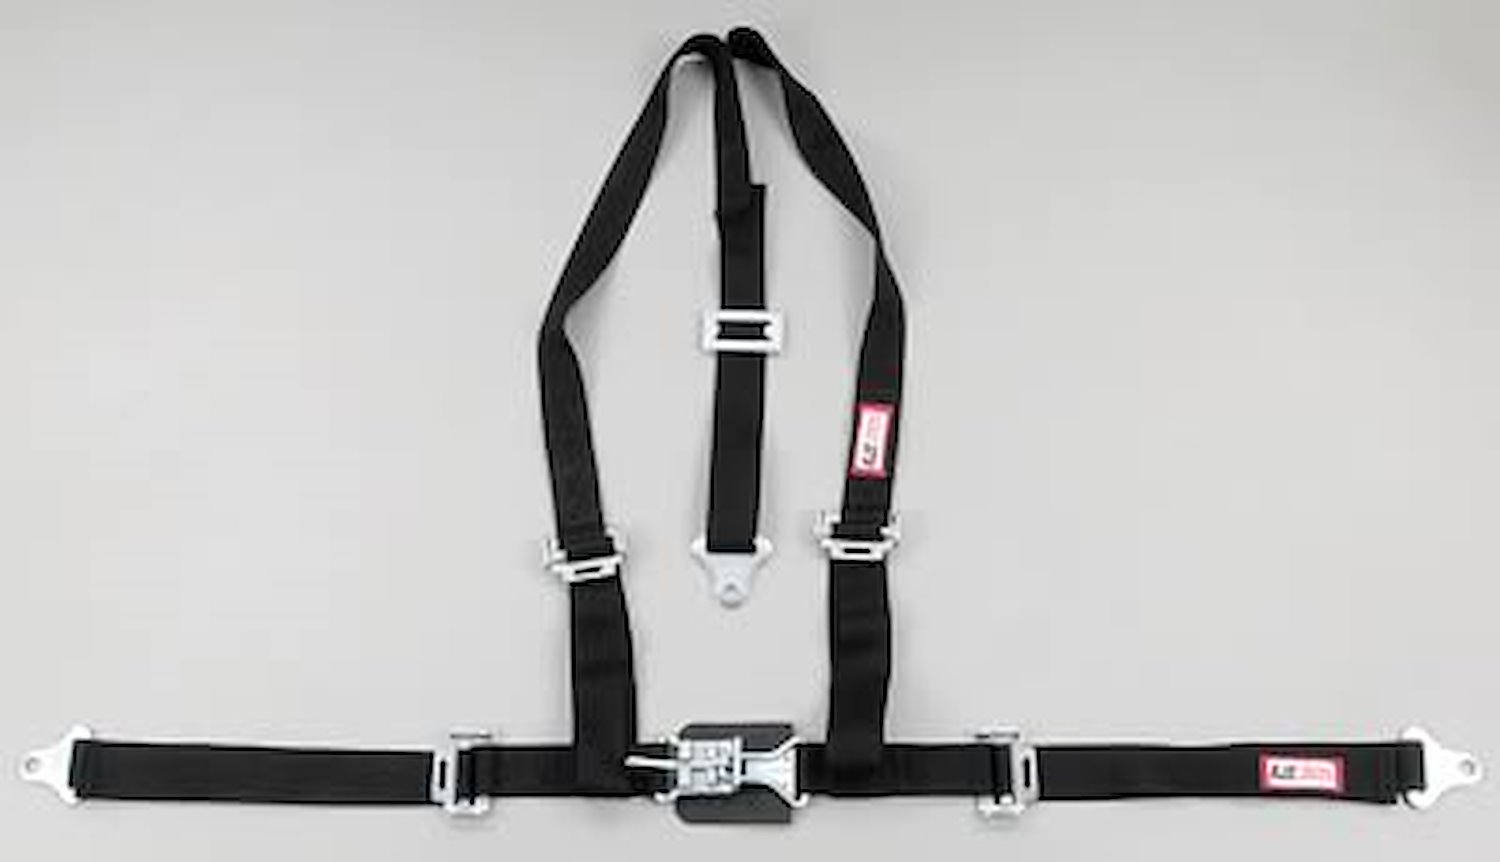 NON-SFI L&L HARNESS 2 PULL UP Lap Belt SEWN IN 2 S.H. V ROLL BAR Mount w/STERNUM STRAP ALL BOLT ENDS GRAY